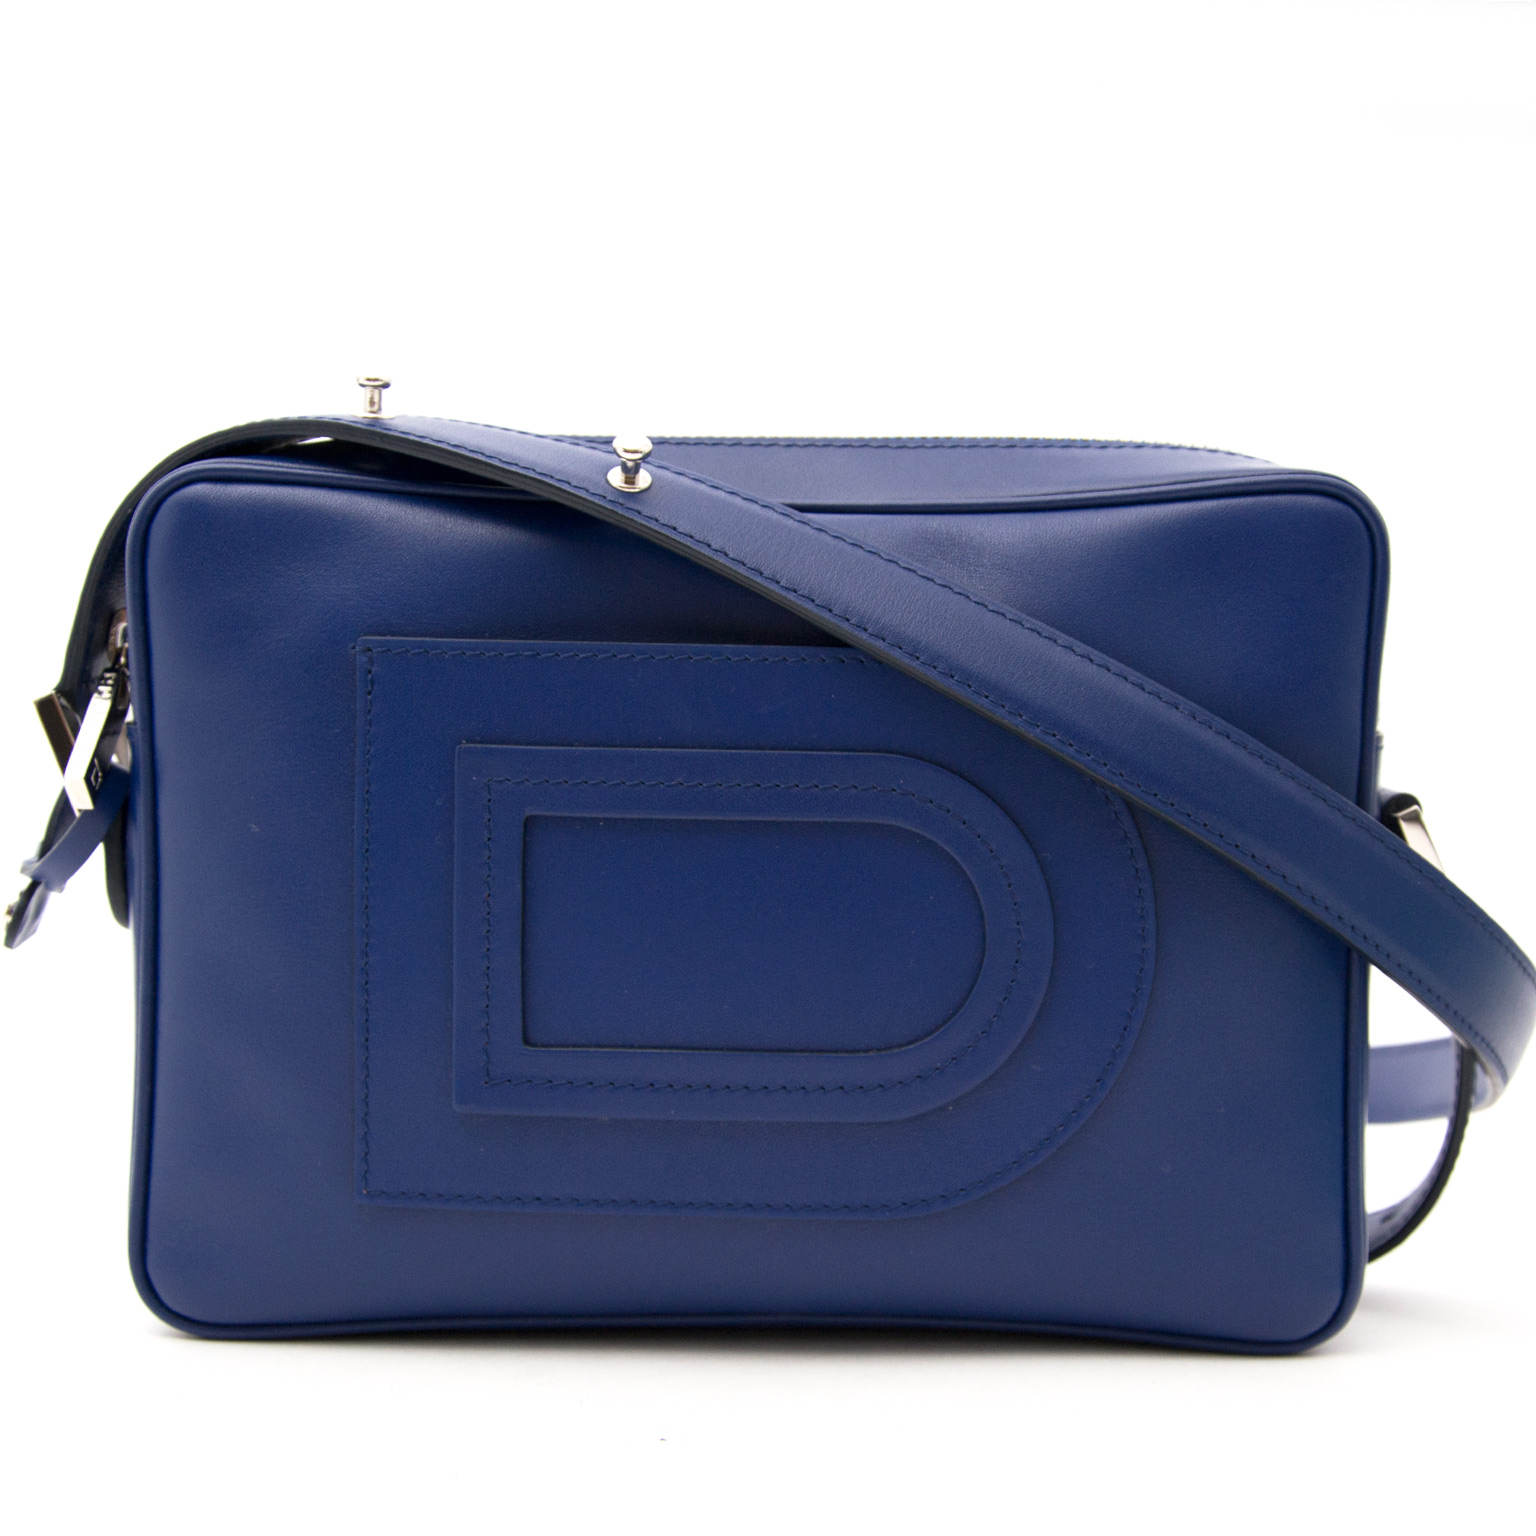 Delvaux - Authenticated Cool Box Handbag - Leather Blue for Women, Very Good Condition